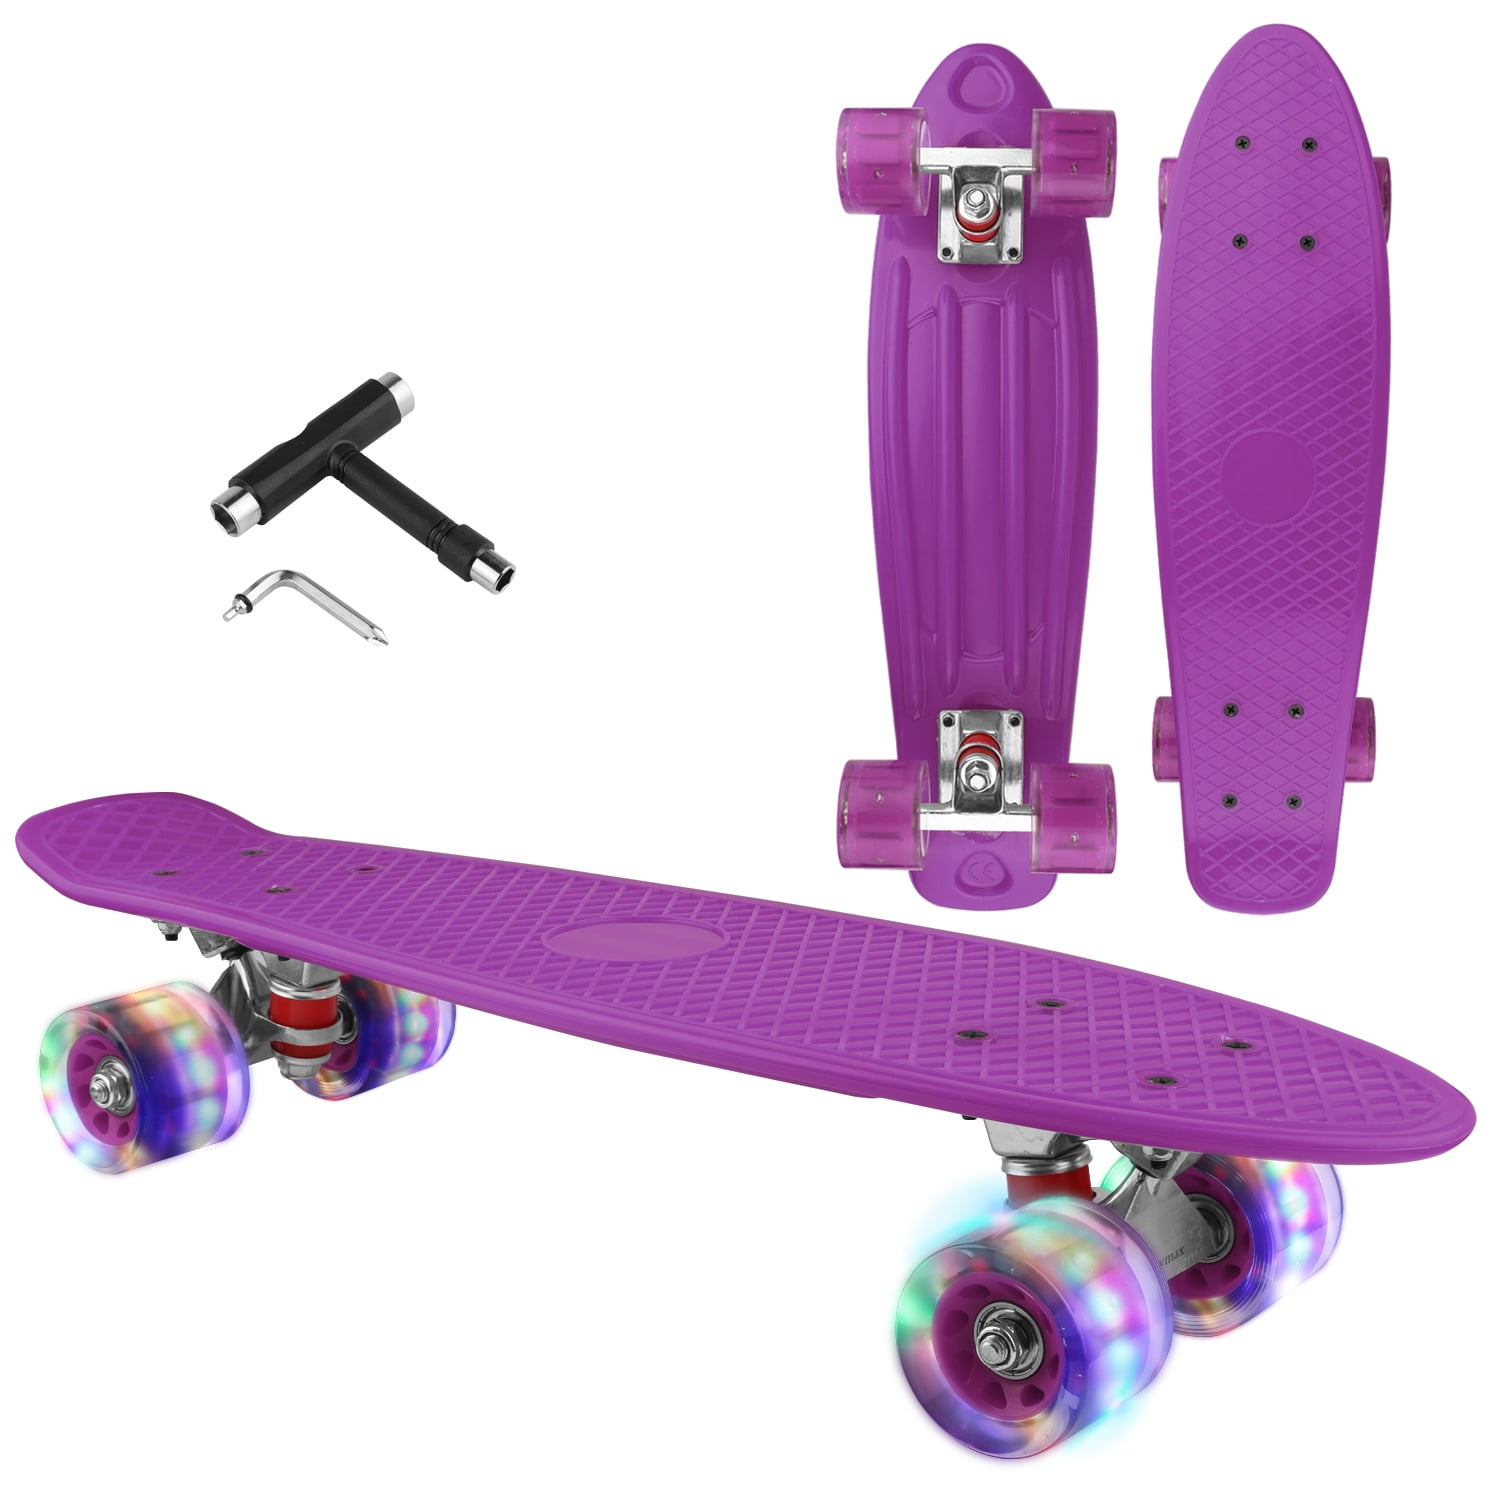 Skateboard Cruiser Complete - 27 inch Skateboards with LED Light Up Wheels  with All-in-one T-Tool for Beginners